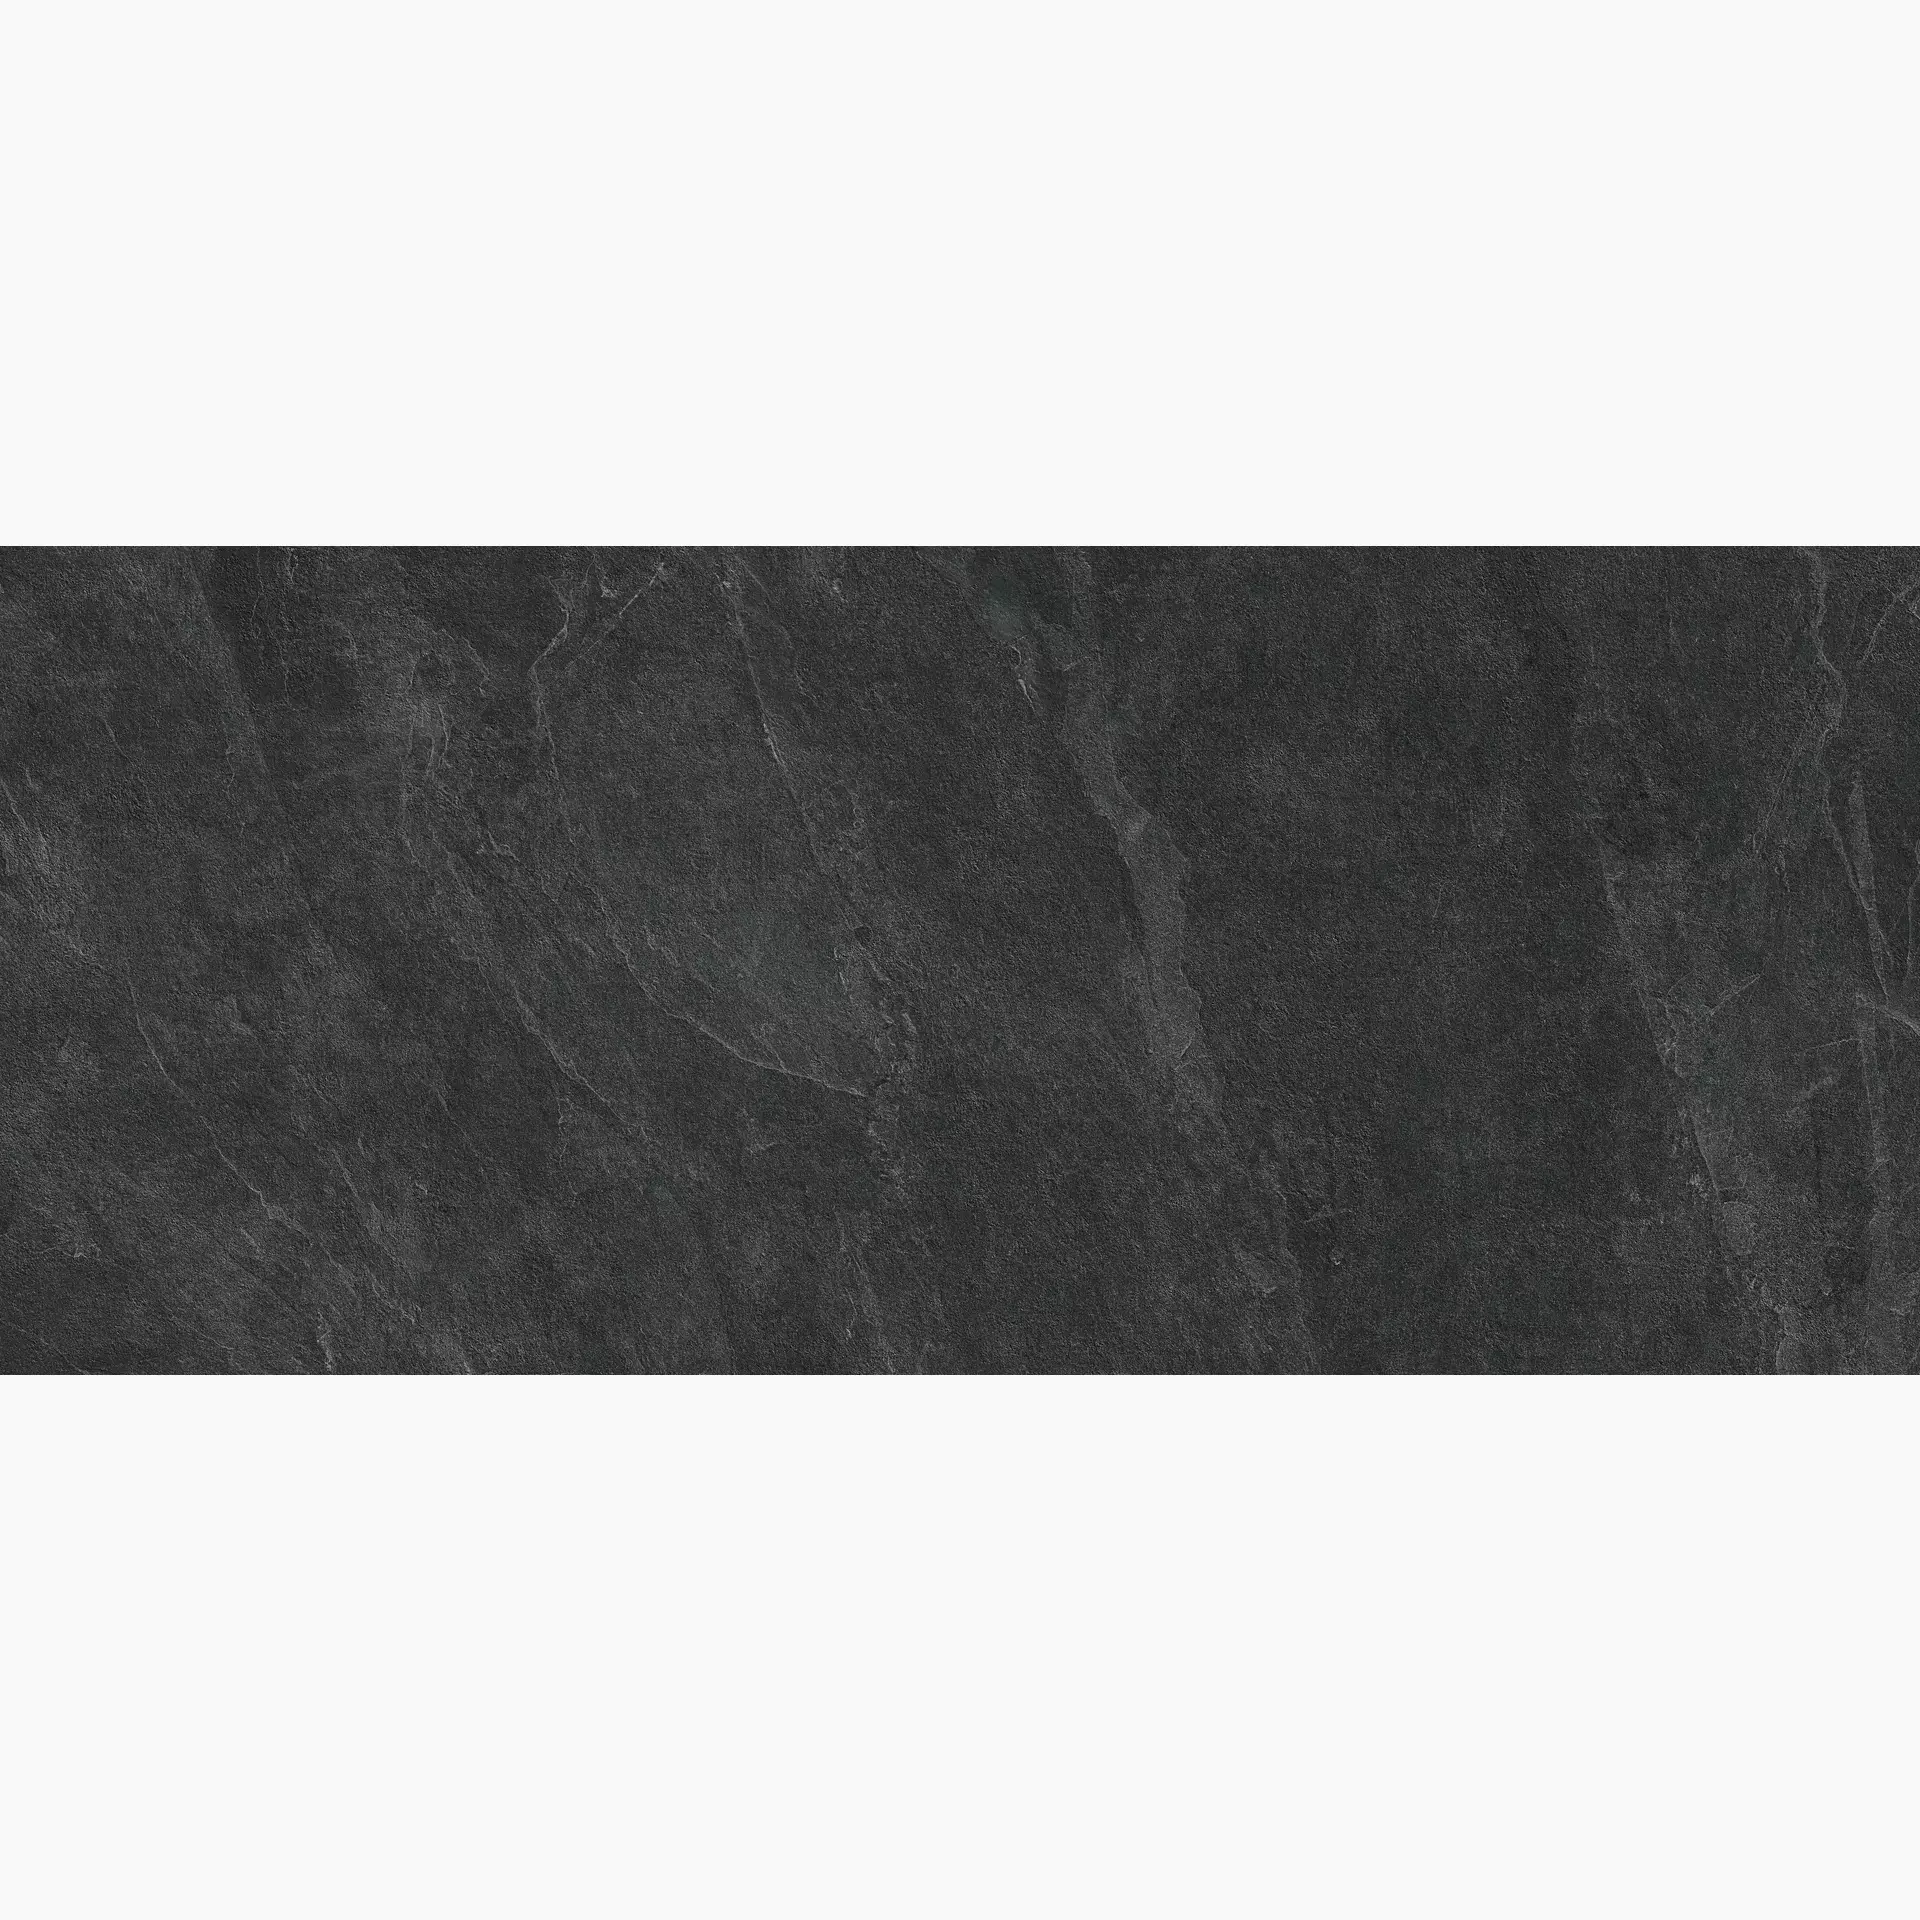 Panaria Zero.3 Stone Trace Abyss Antibacterial - Naturale PZ6ST00 120x278cm rectified 6mm